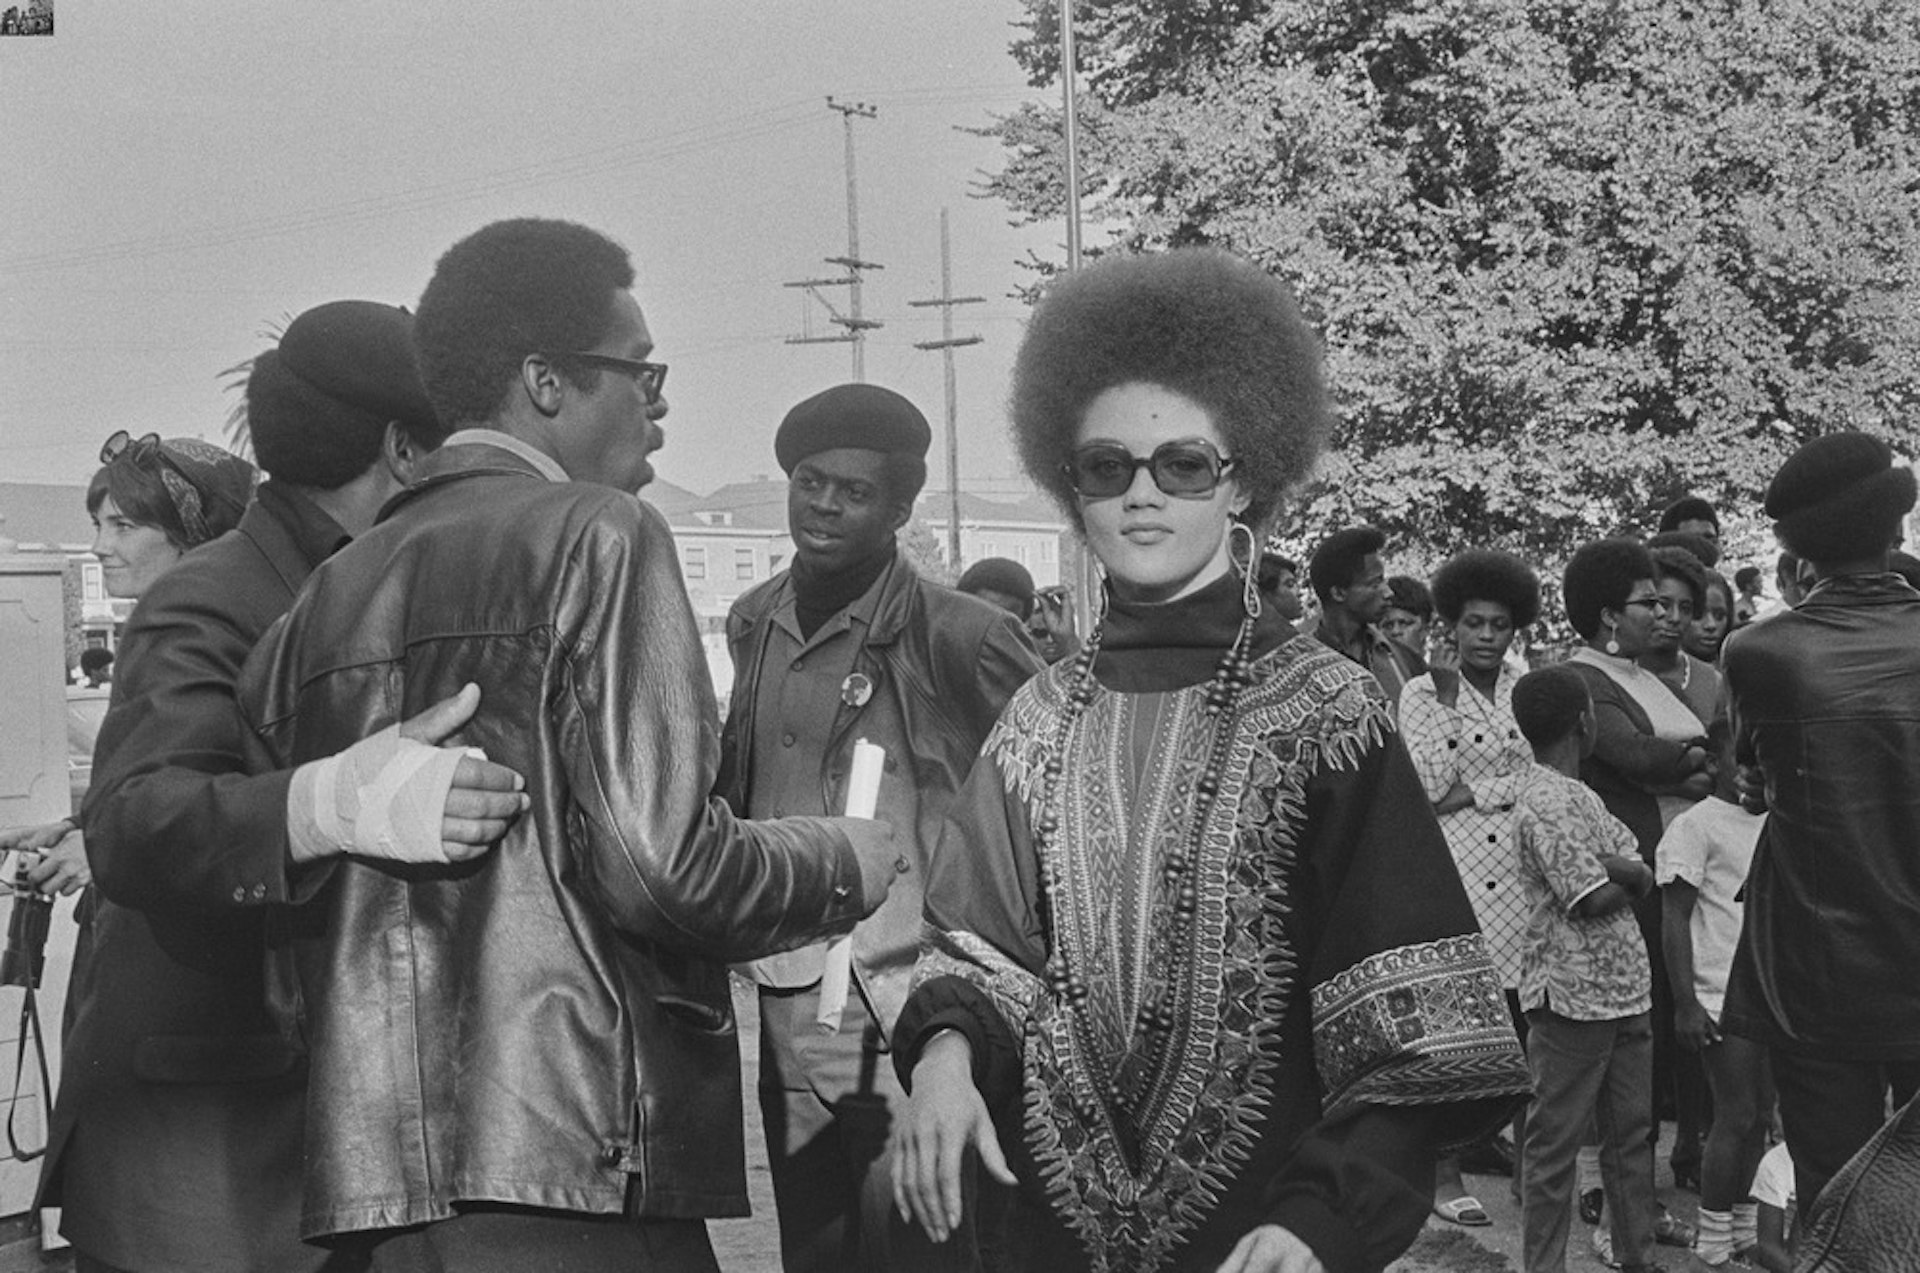 Documenting the unseen side of the Black Panther Party